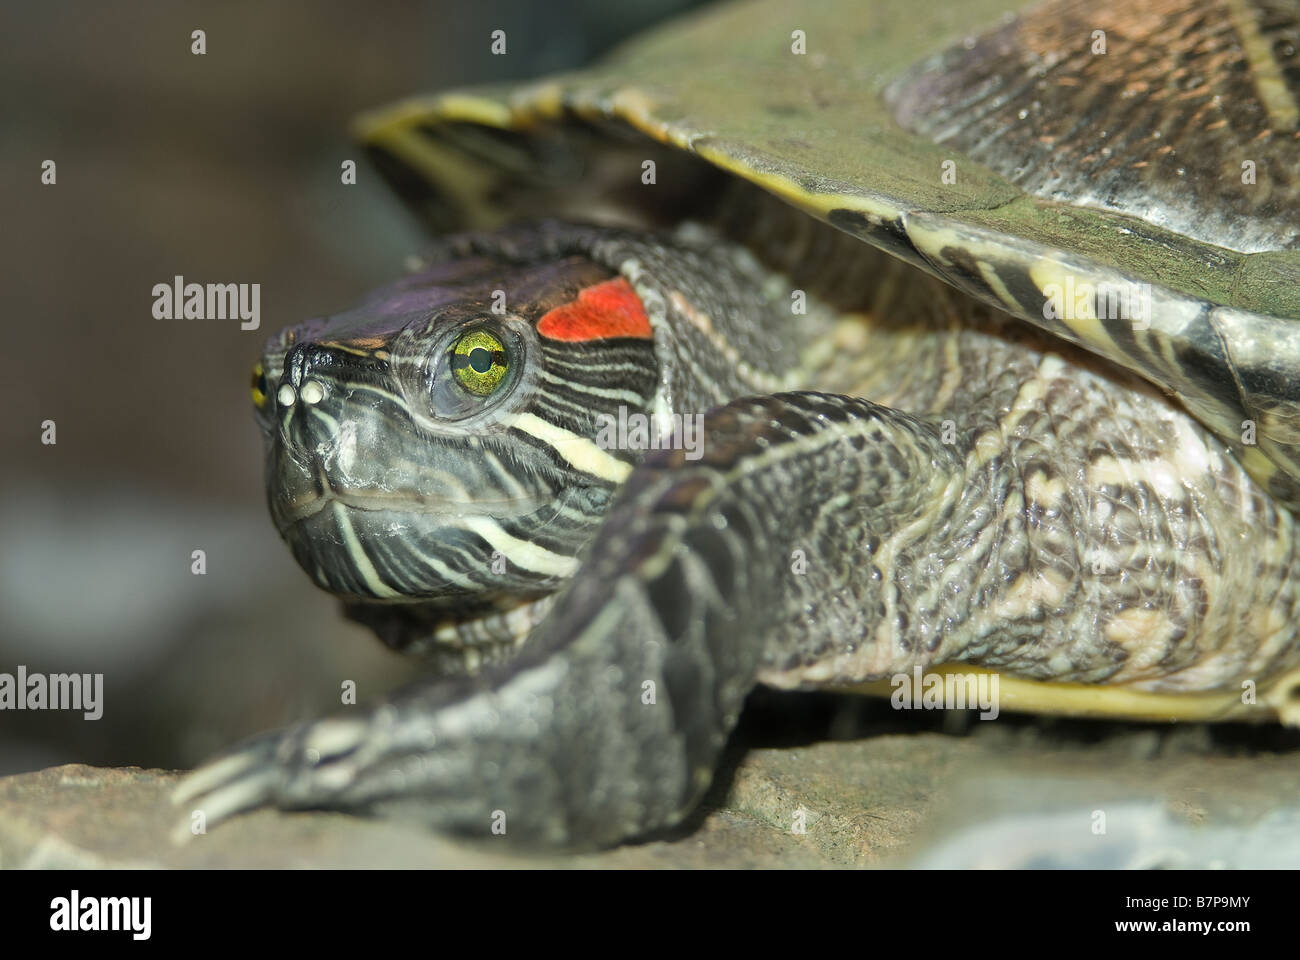 Close up of a red-eared slider turtle Stock Photo